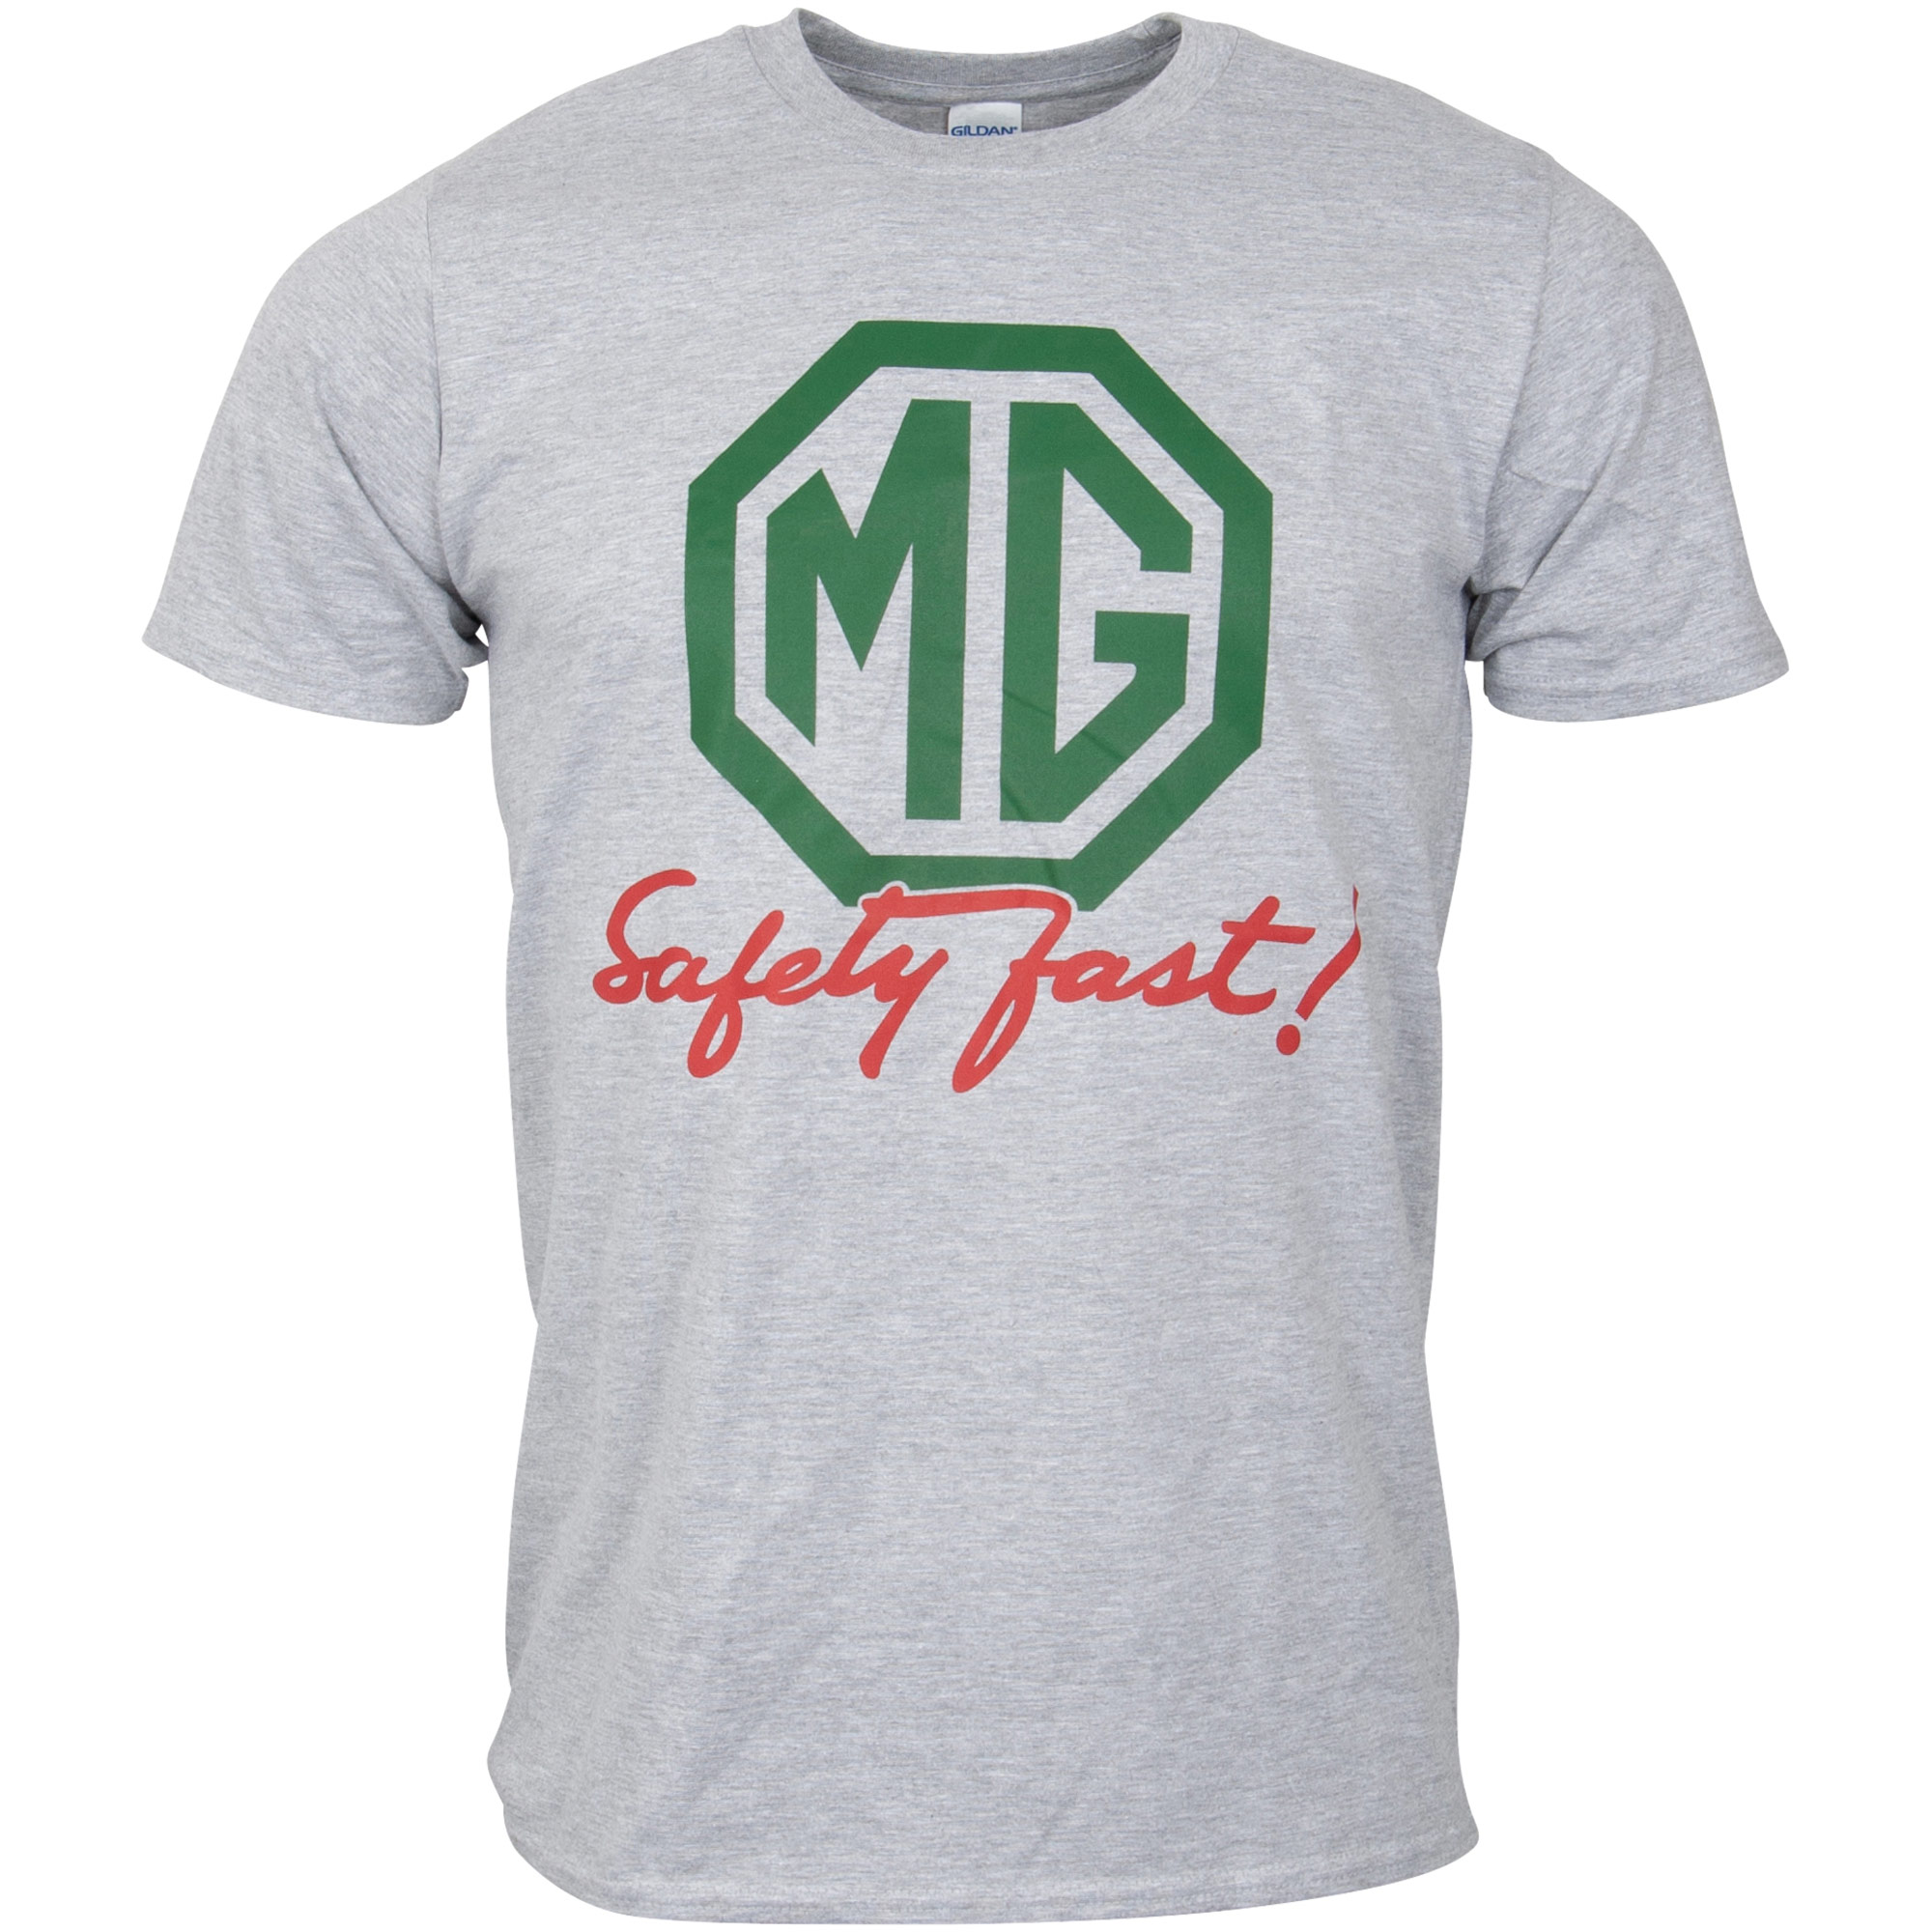 MG t-shirt "Safely Fast" - grey